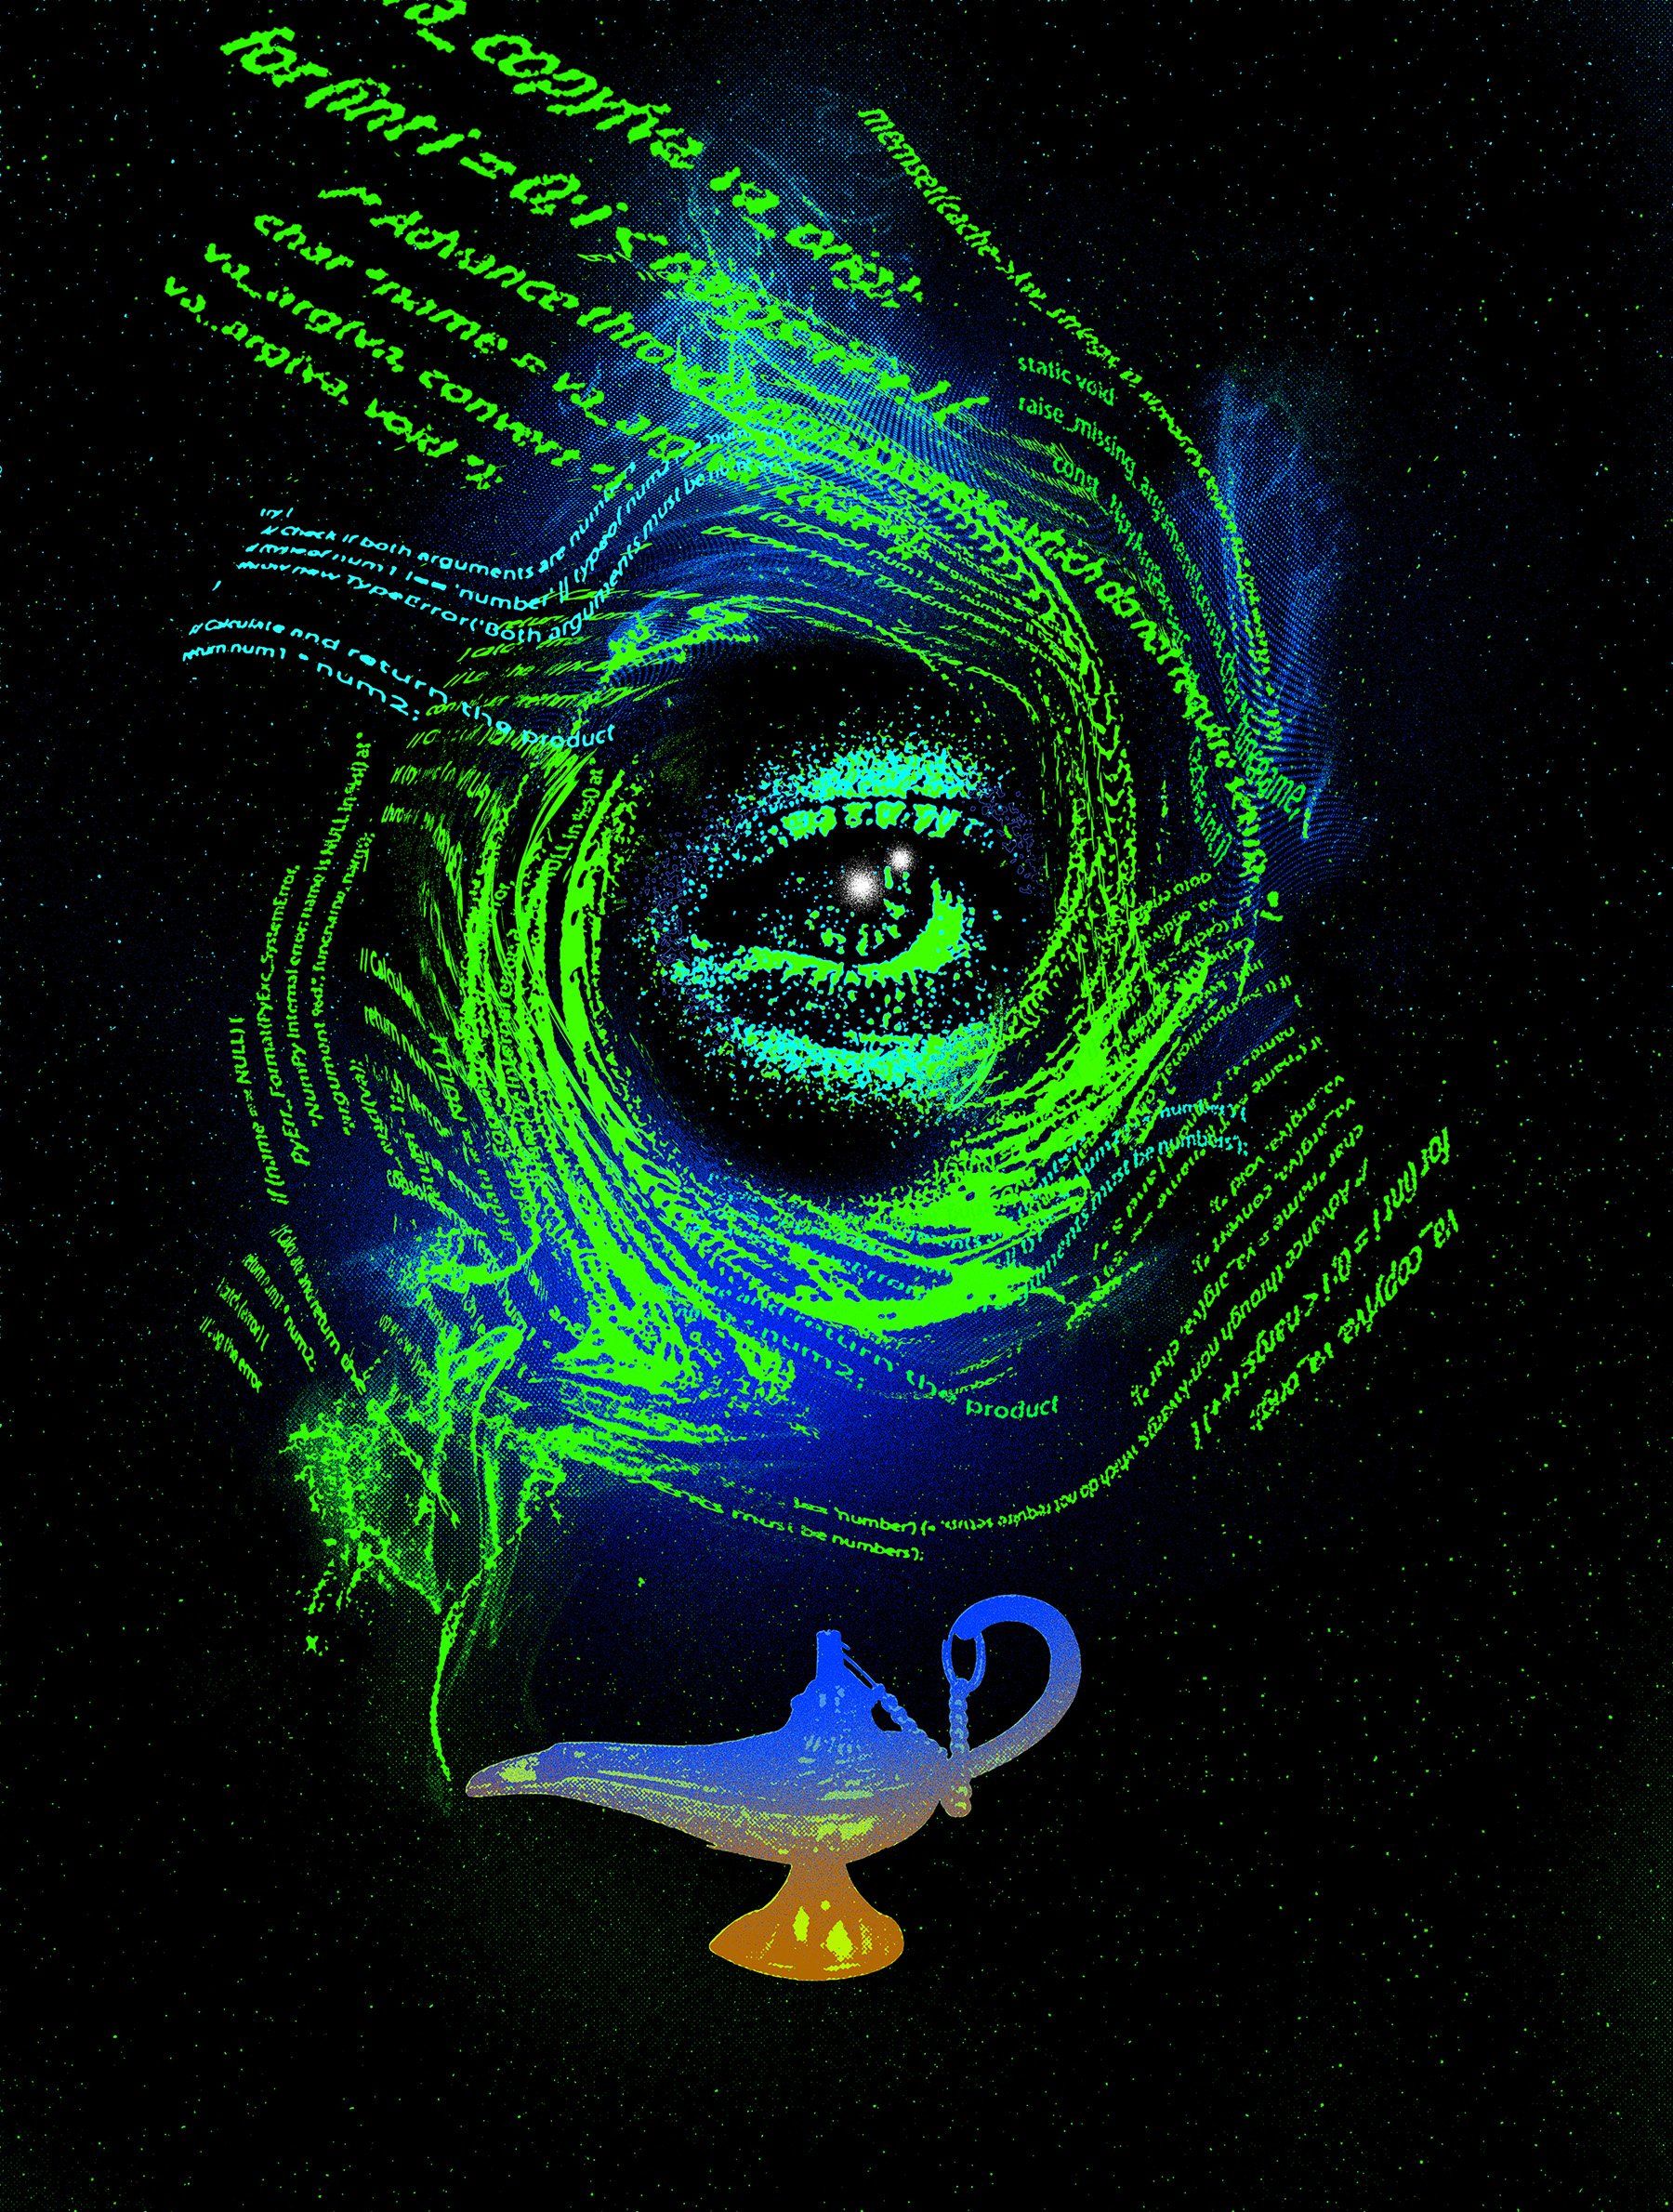 An illustration of an eye surrounded by code with a genie's lamp below it.  